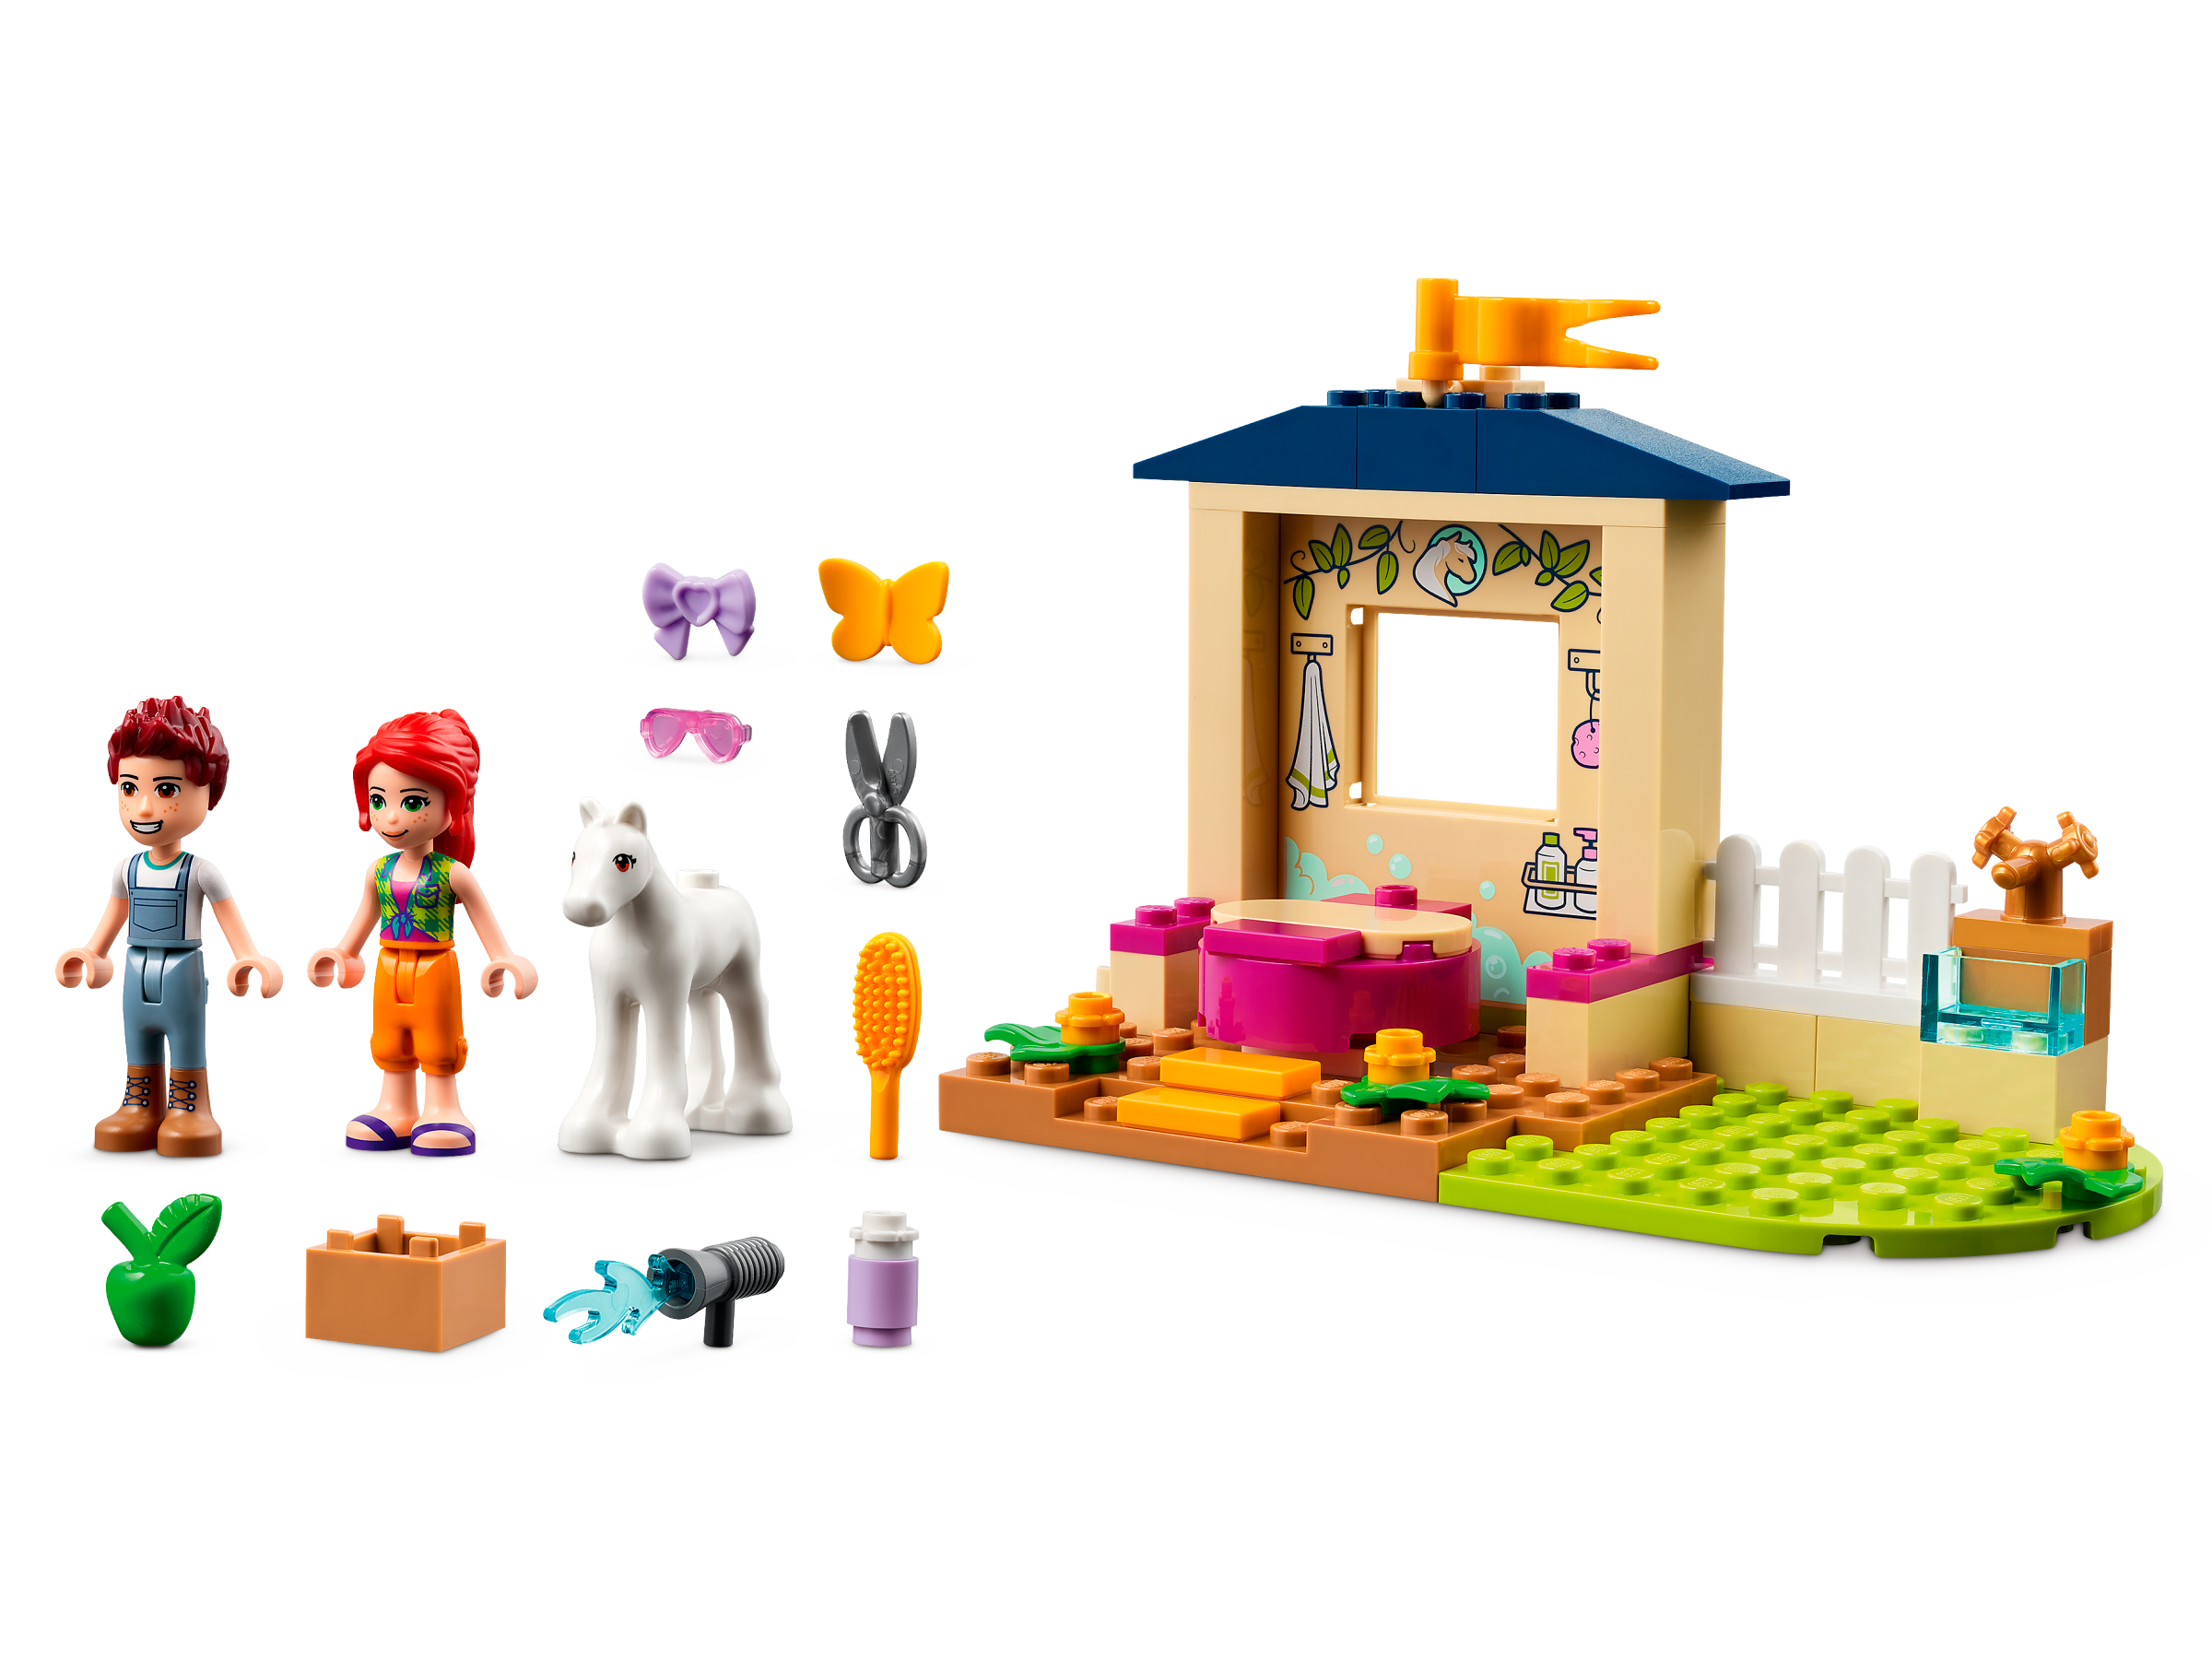 Pony-Washing Stable 41696 | | Buy the Friends US Shop Official online LEGO® at